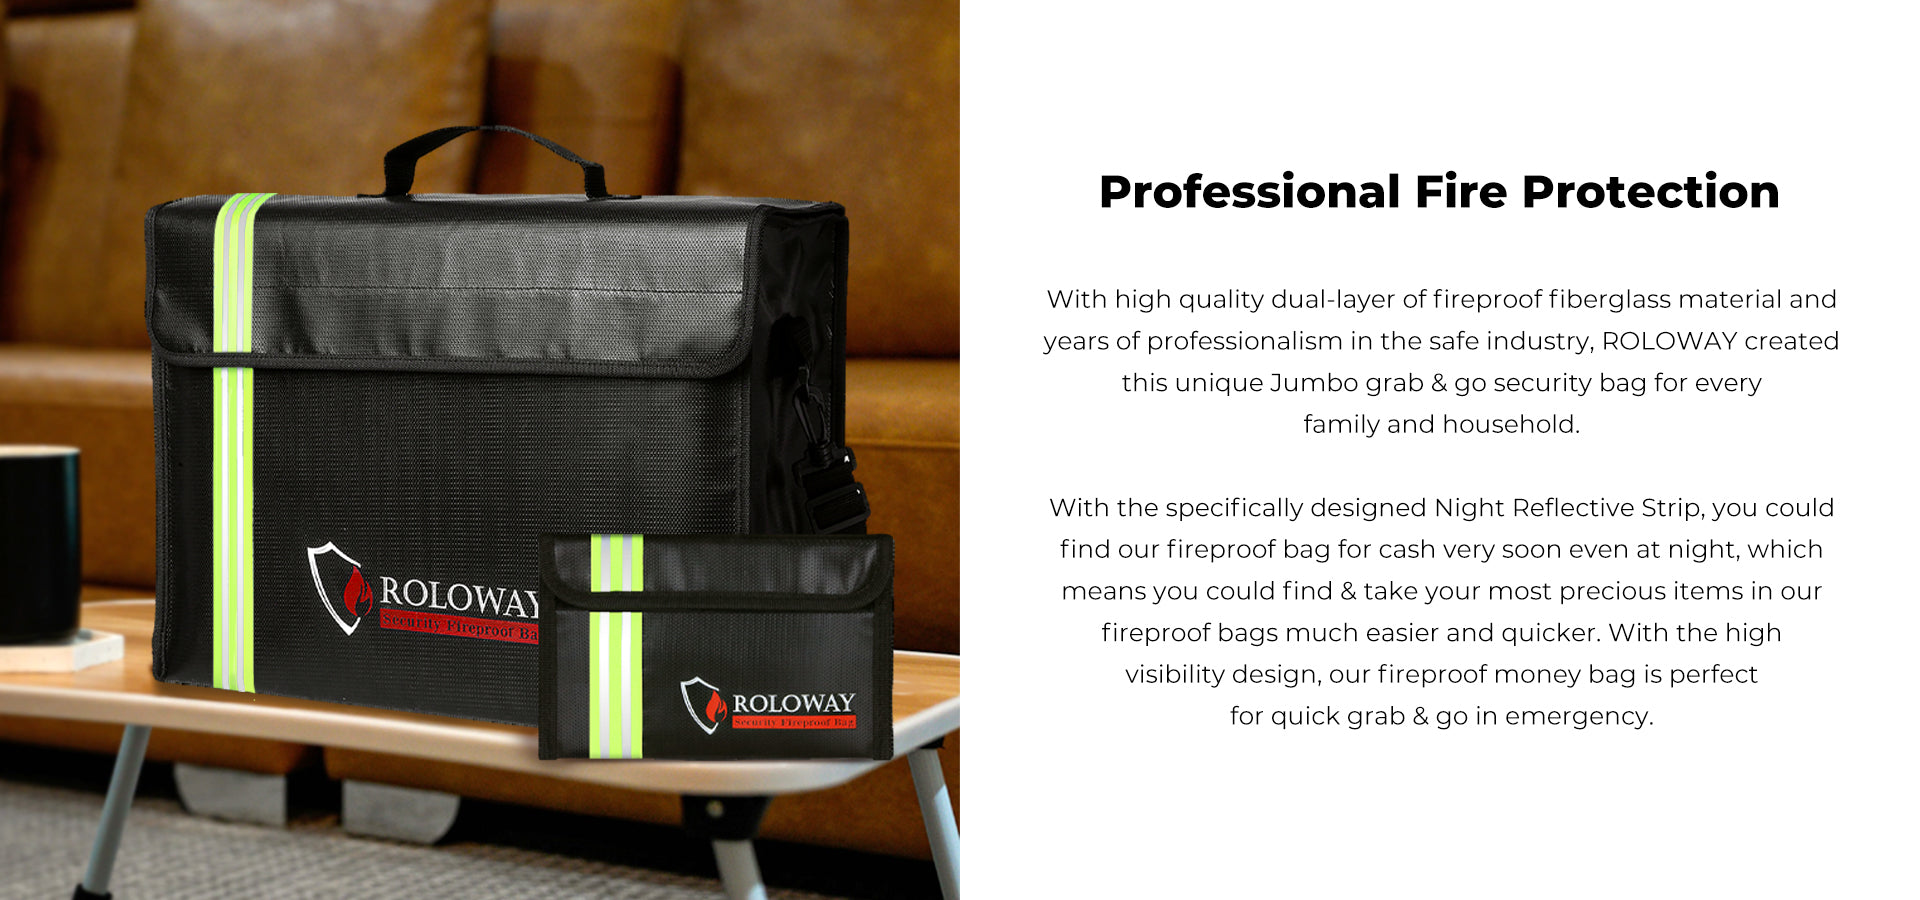 ROLOWAY JUMBO Fireproof Bag with Reflective Strip, 17 x 12 x 5.8 inches3